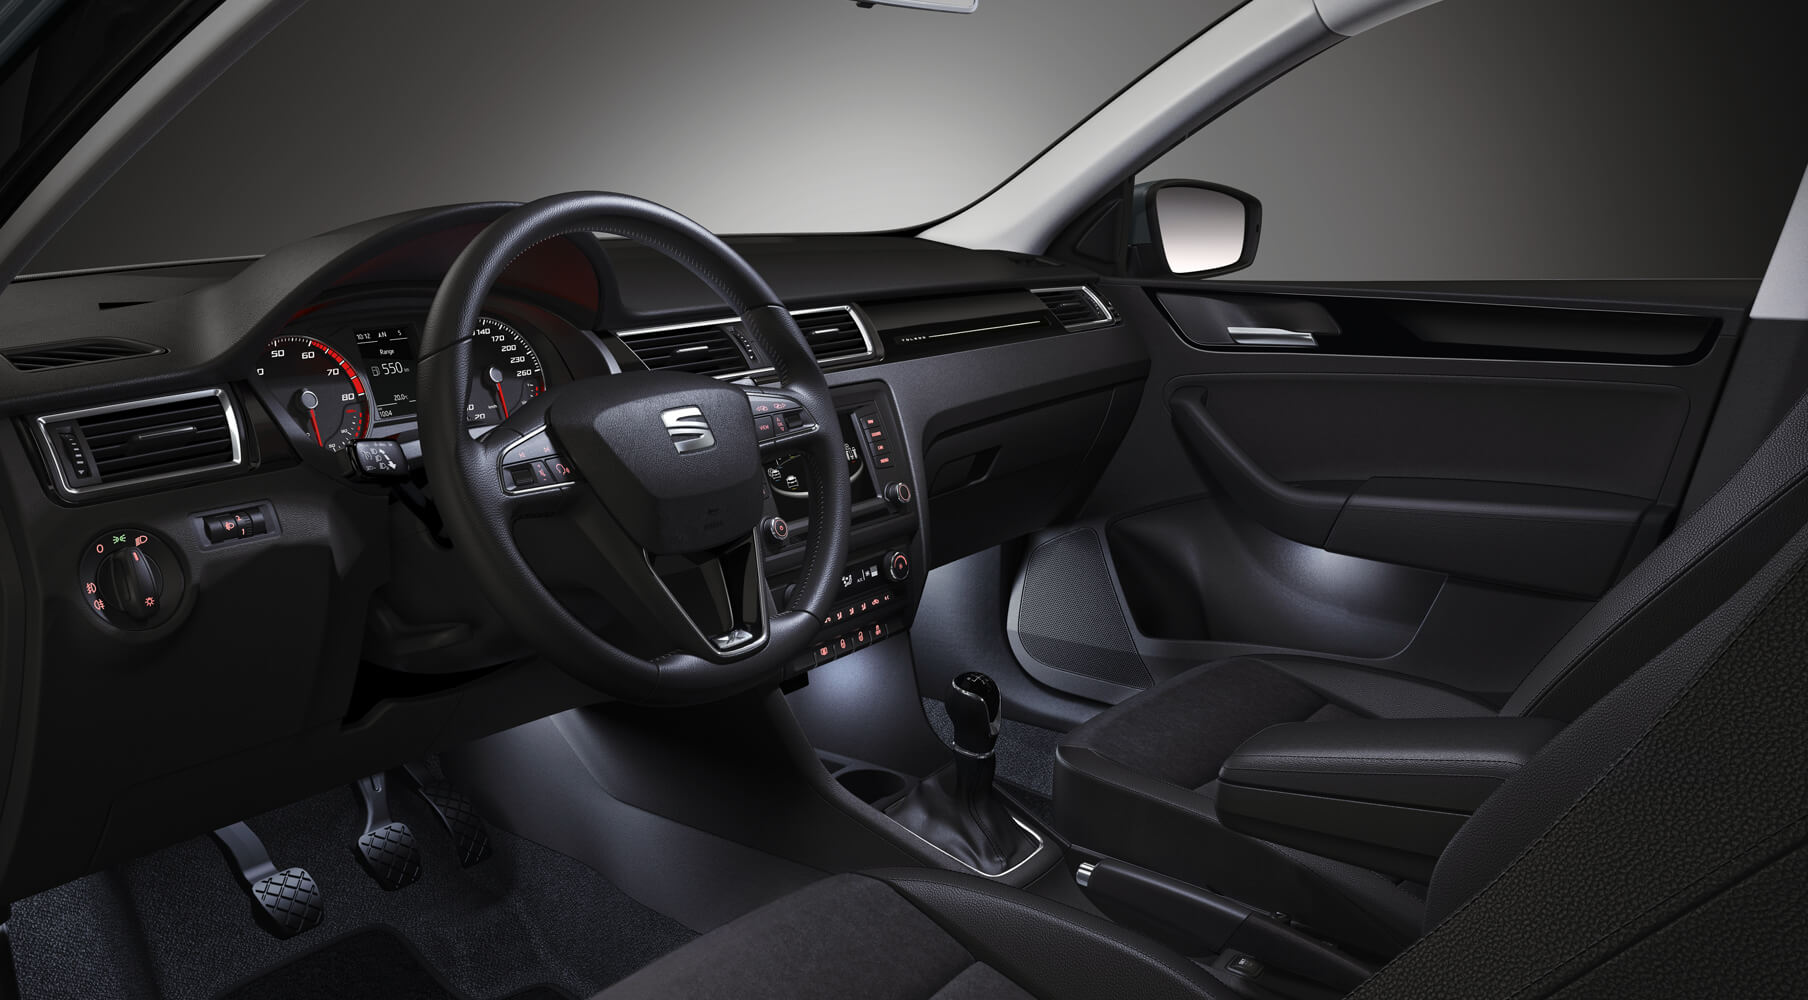 https://www.seat.co.uk/content/dam/public/seat-website/car-terms/i/interior-ambient-lightning/seat-toledo-interior-ambient-lighting.jpg